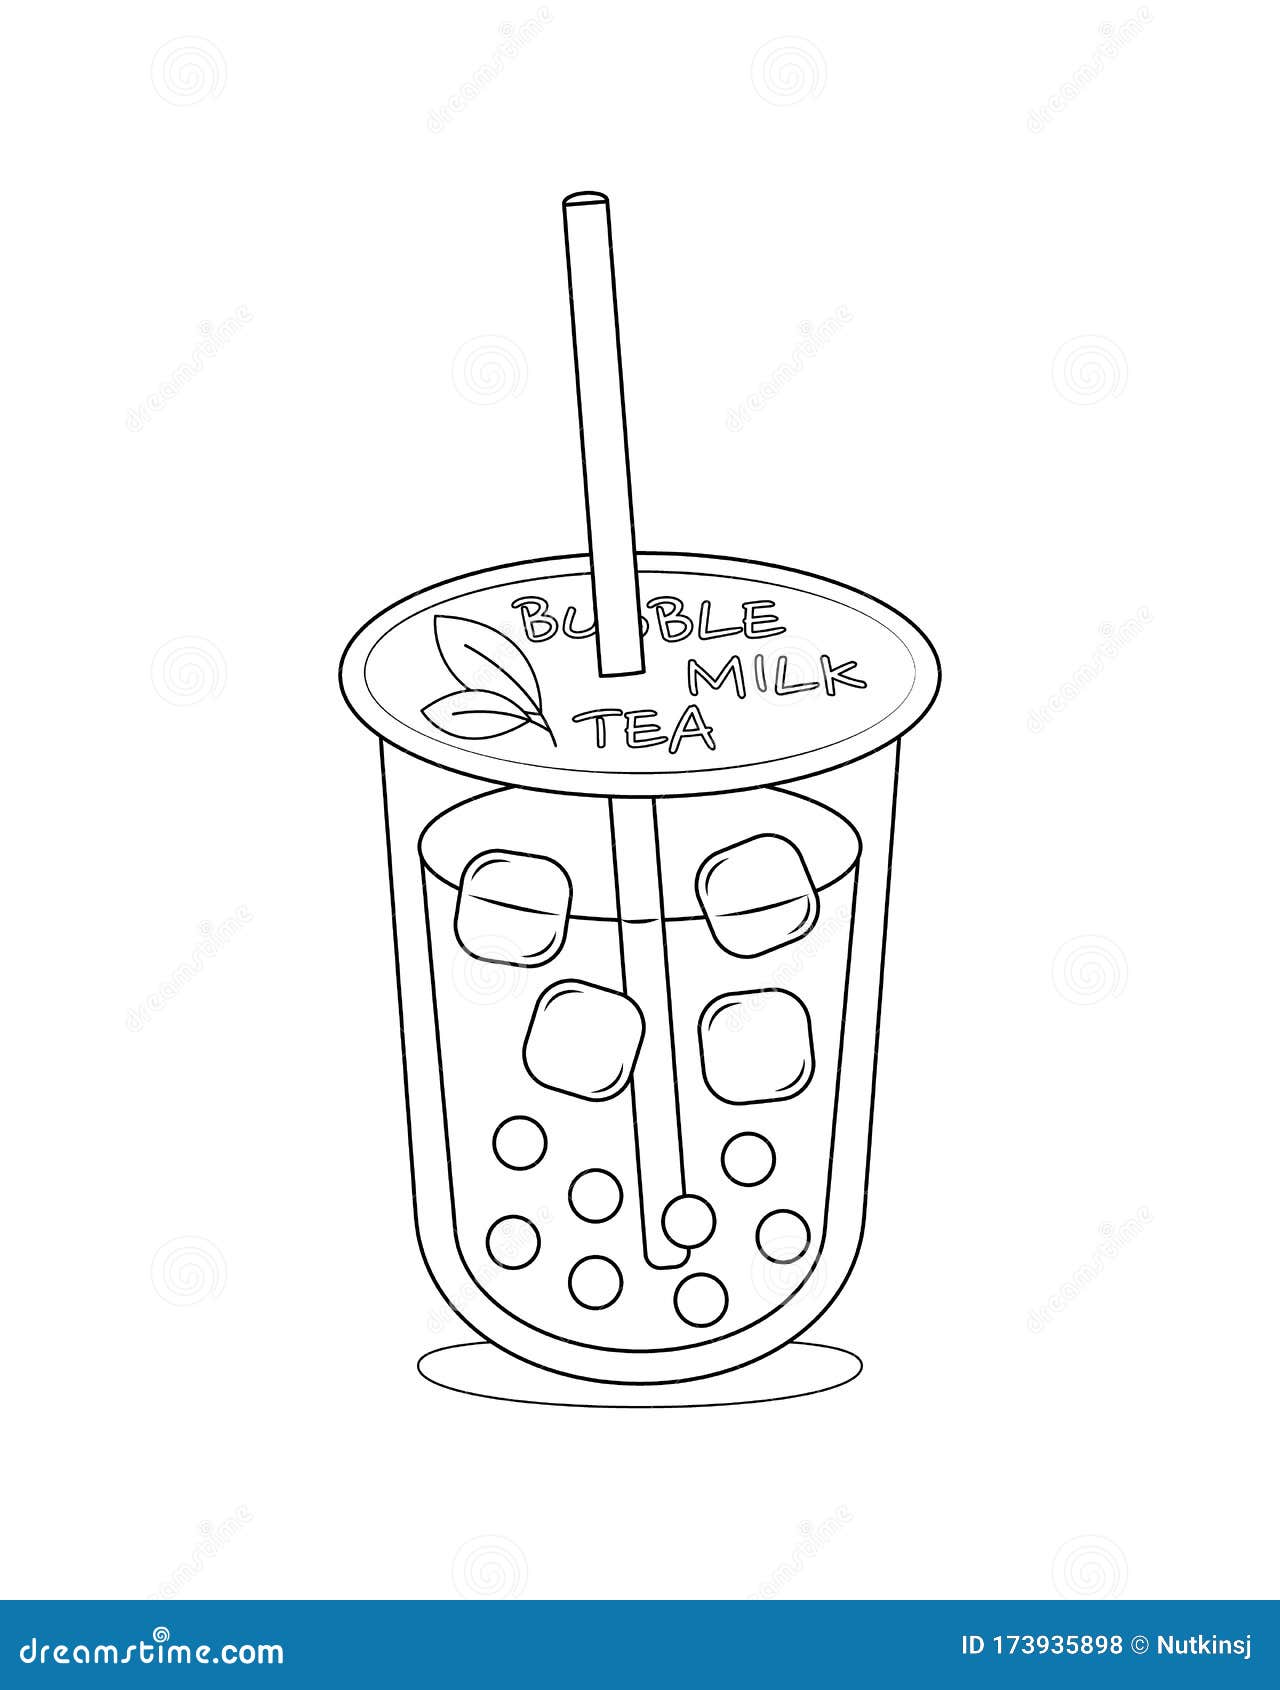 Bubble Tea Vector Colorless Stock Vector   Illustration of ...